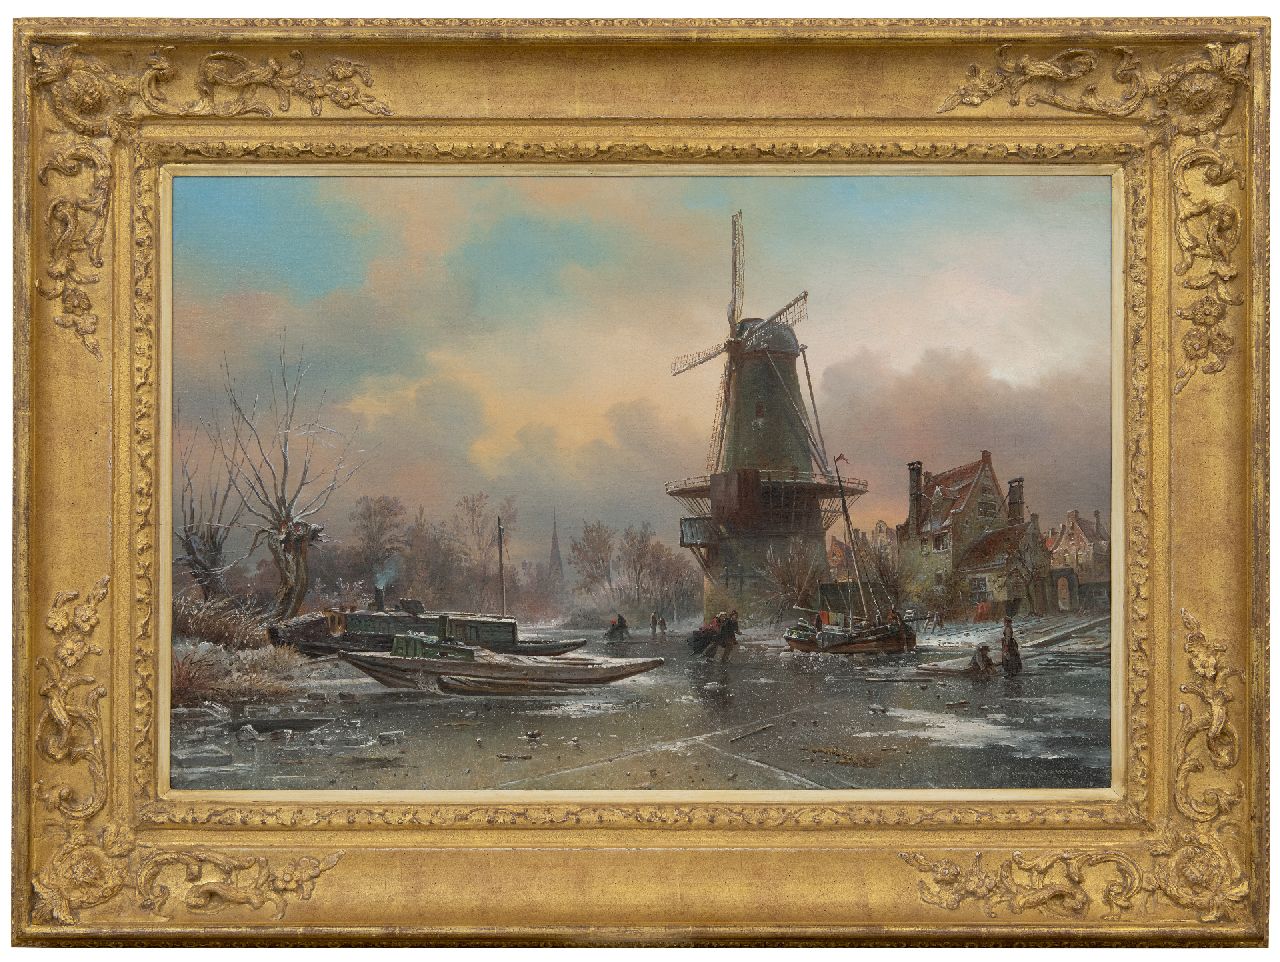 Bommel E.P. van | Elias Pieter van Bommel, Skaters on a frozen canal near a windmill, oil on canvas 50.1 x 76.1 cm, signed l.r. and dated 1870